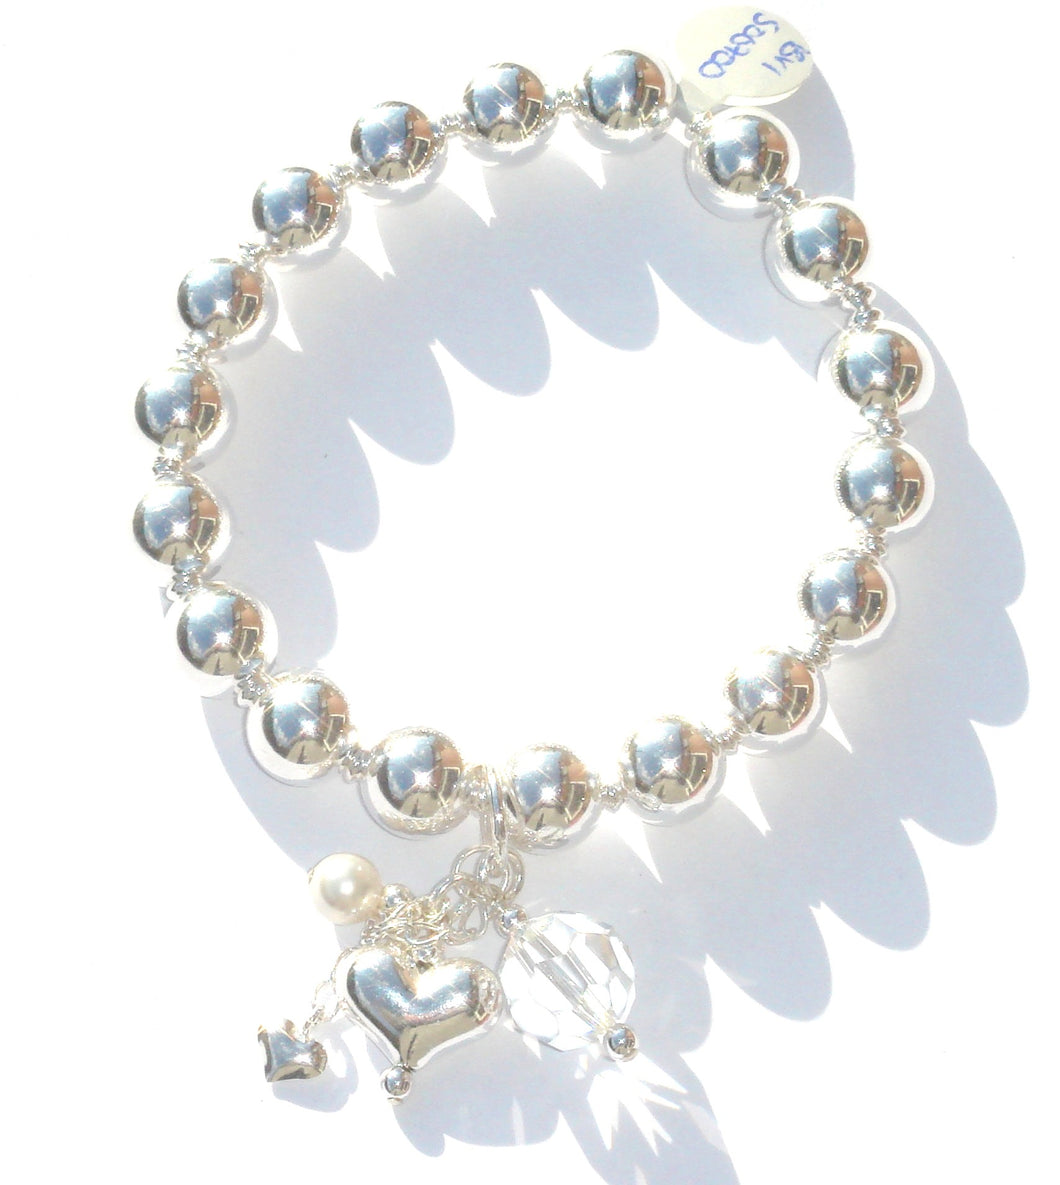 Vivienne Sterling Silver Ball Bracelet with Swarovski® Faceted Crystal and Pearl Drop on Sterling Silver Chain